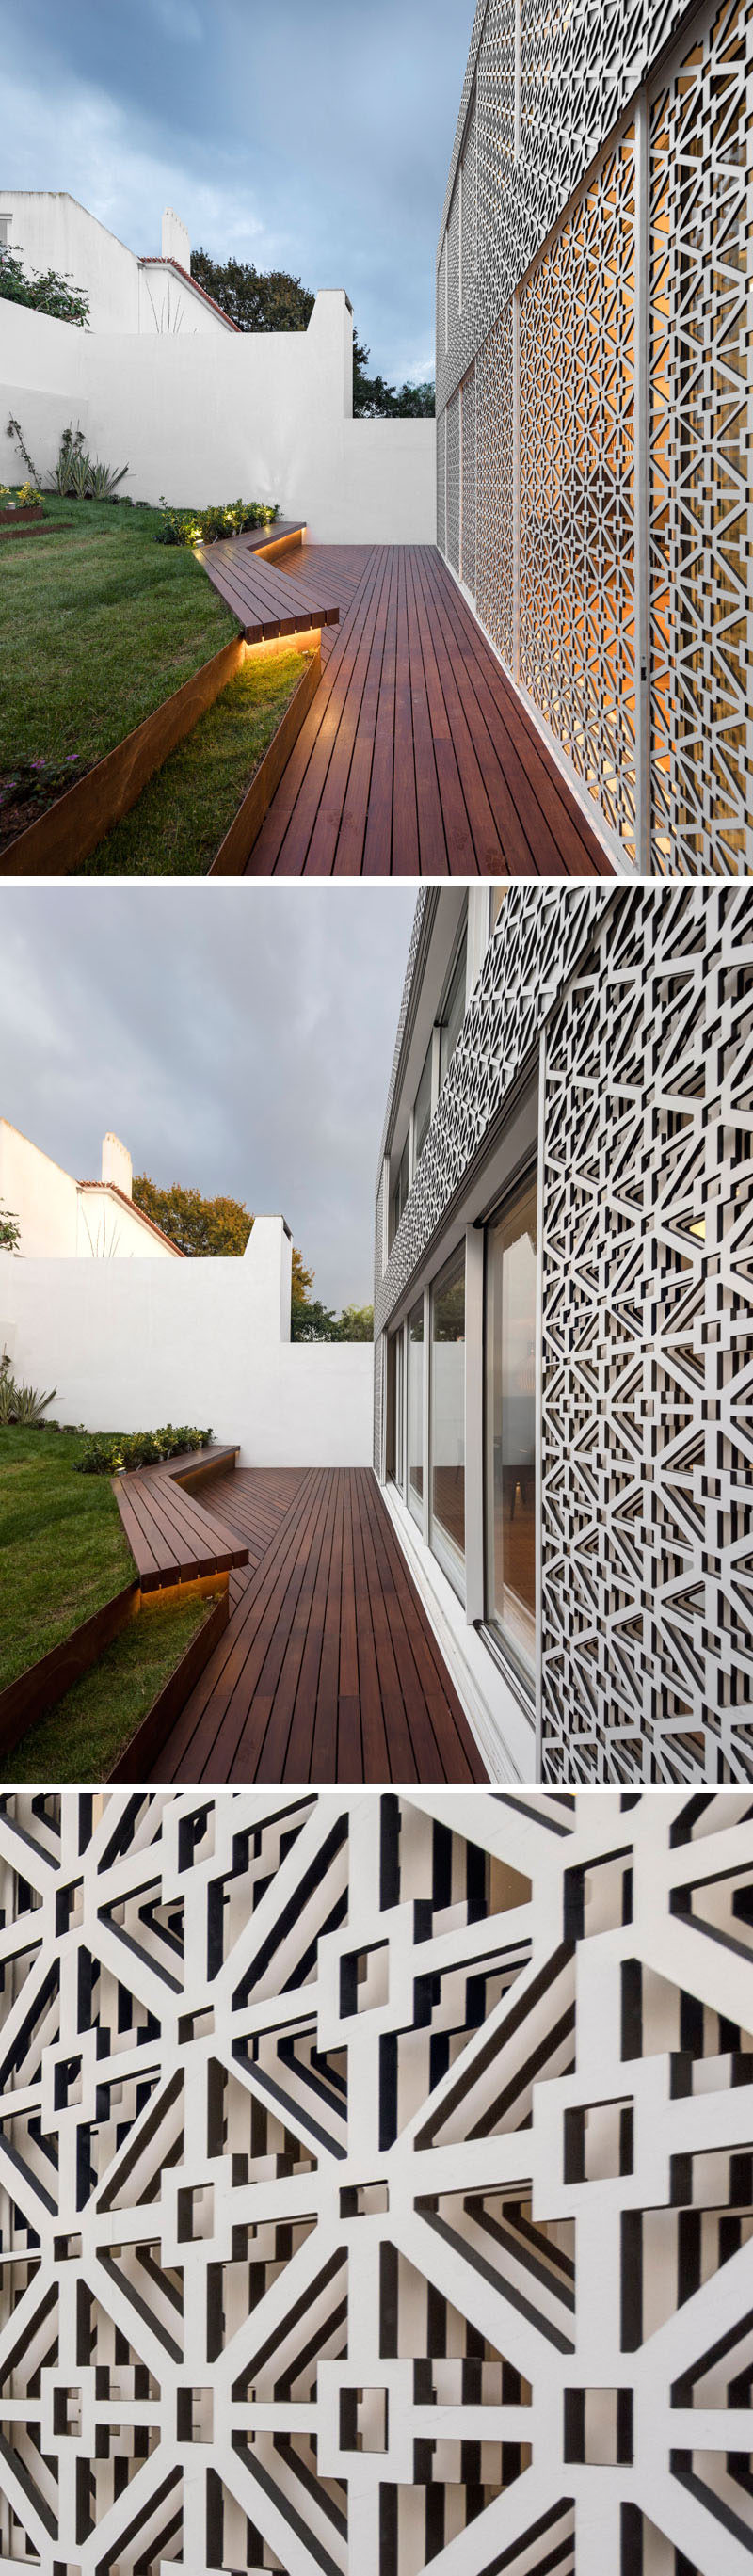 The rear of this house is covered in a white artistic screen inspired by traditional Portuguese tiles, to allow sunlight to filter through to the interior of the home and to provide added security.